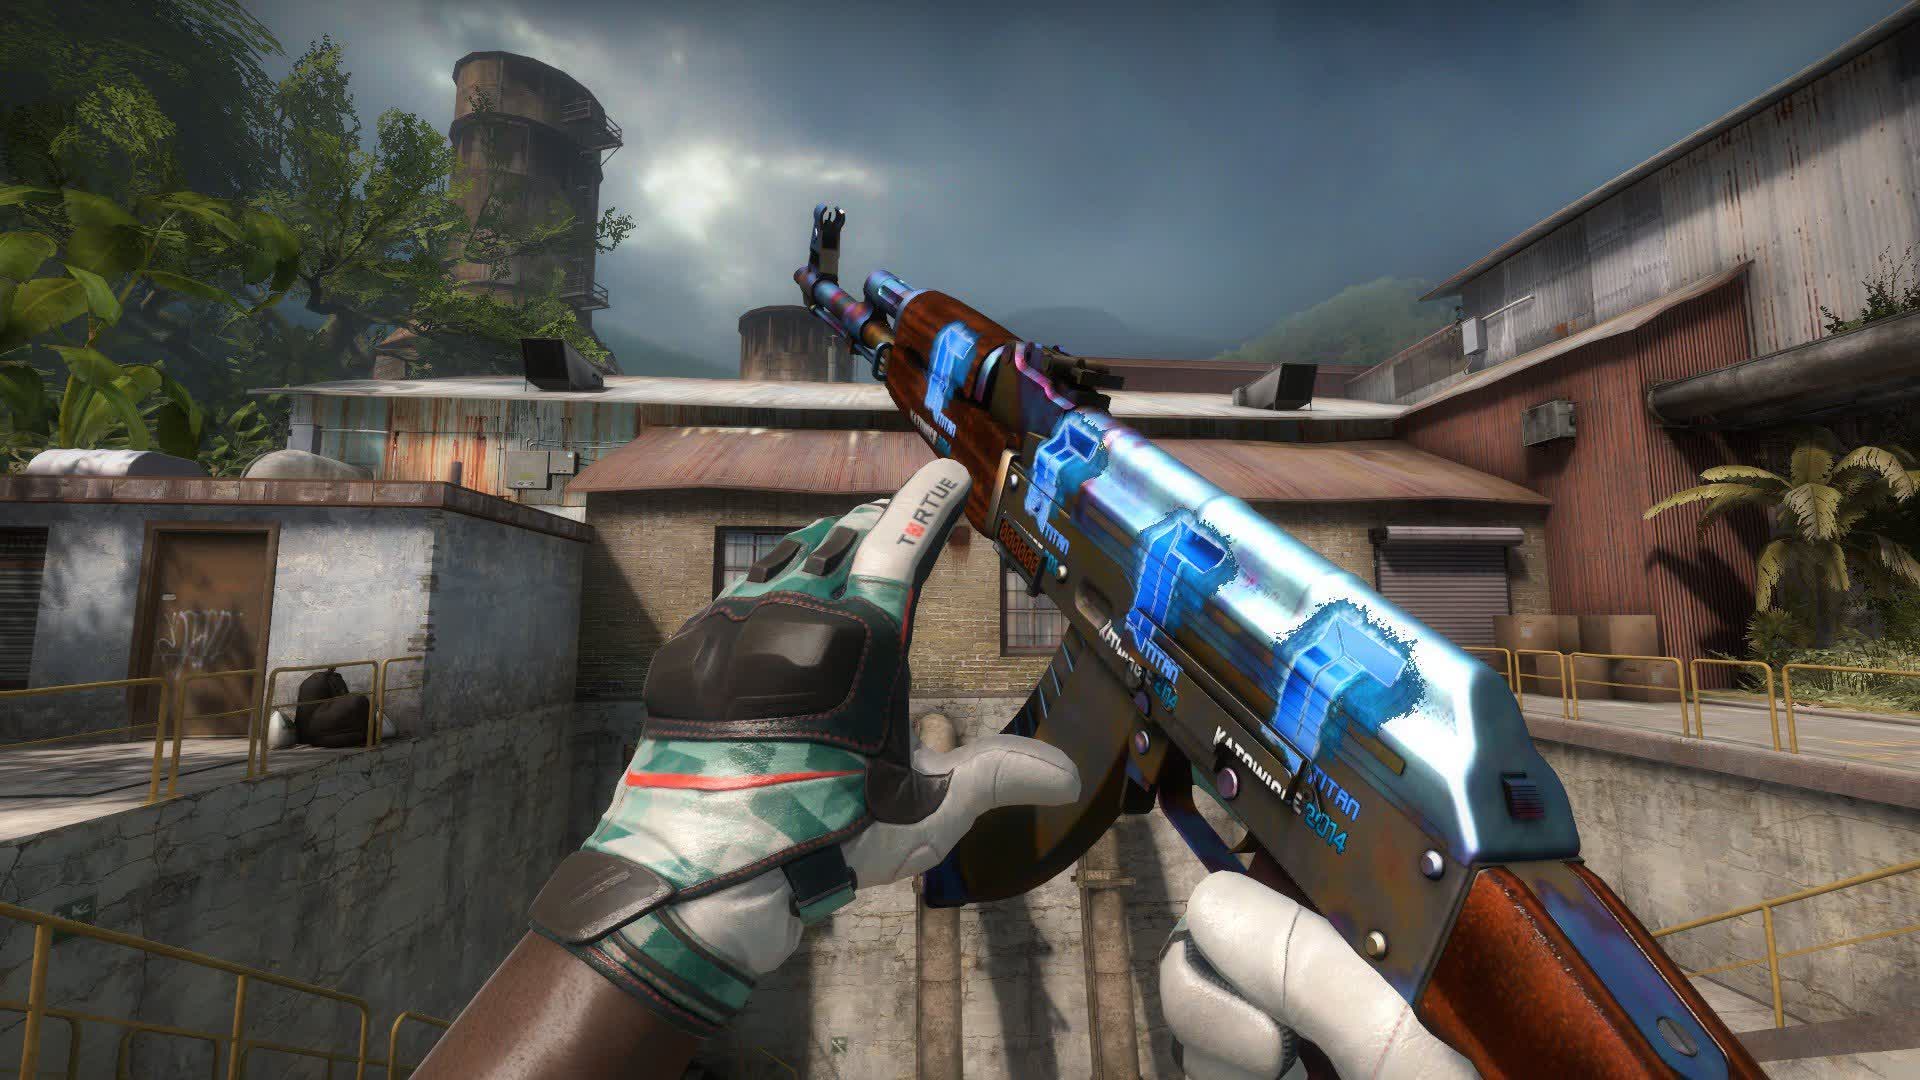 Extremely rare CS:GO AK-47 skin sold for over $400,000